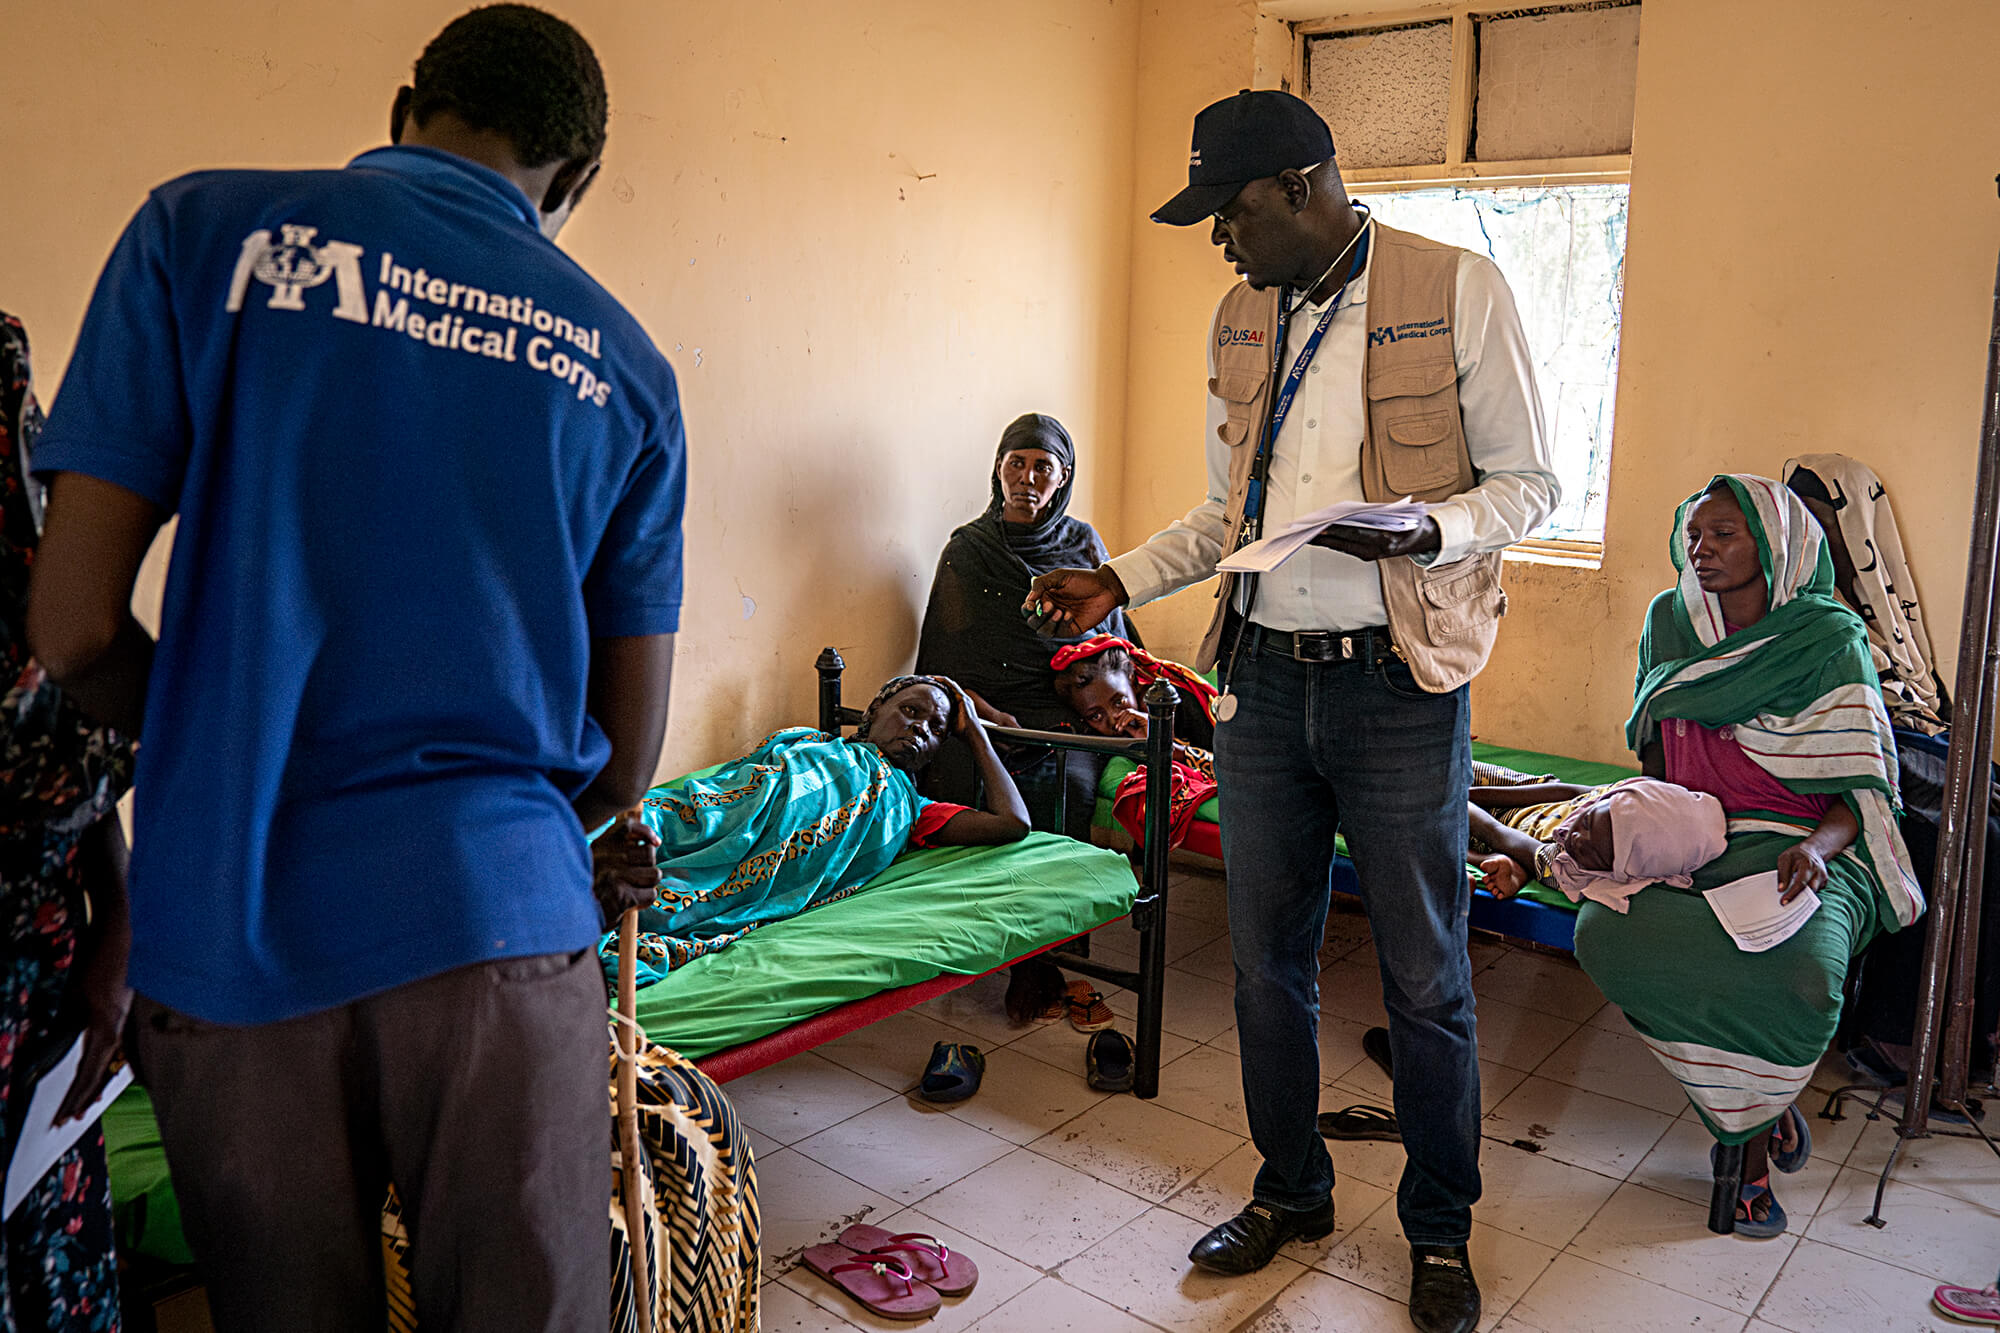 Dr. William and other staff members meet with patients at the International Medical Corps health clinic in Renk, South Sudan.